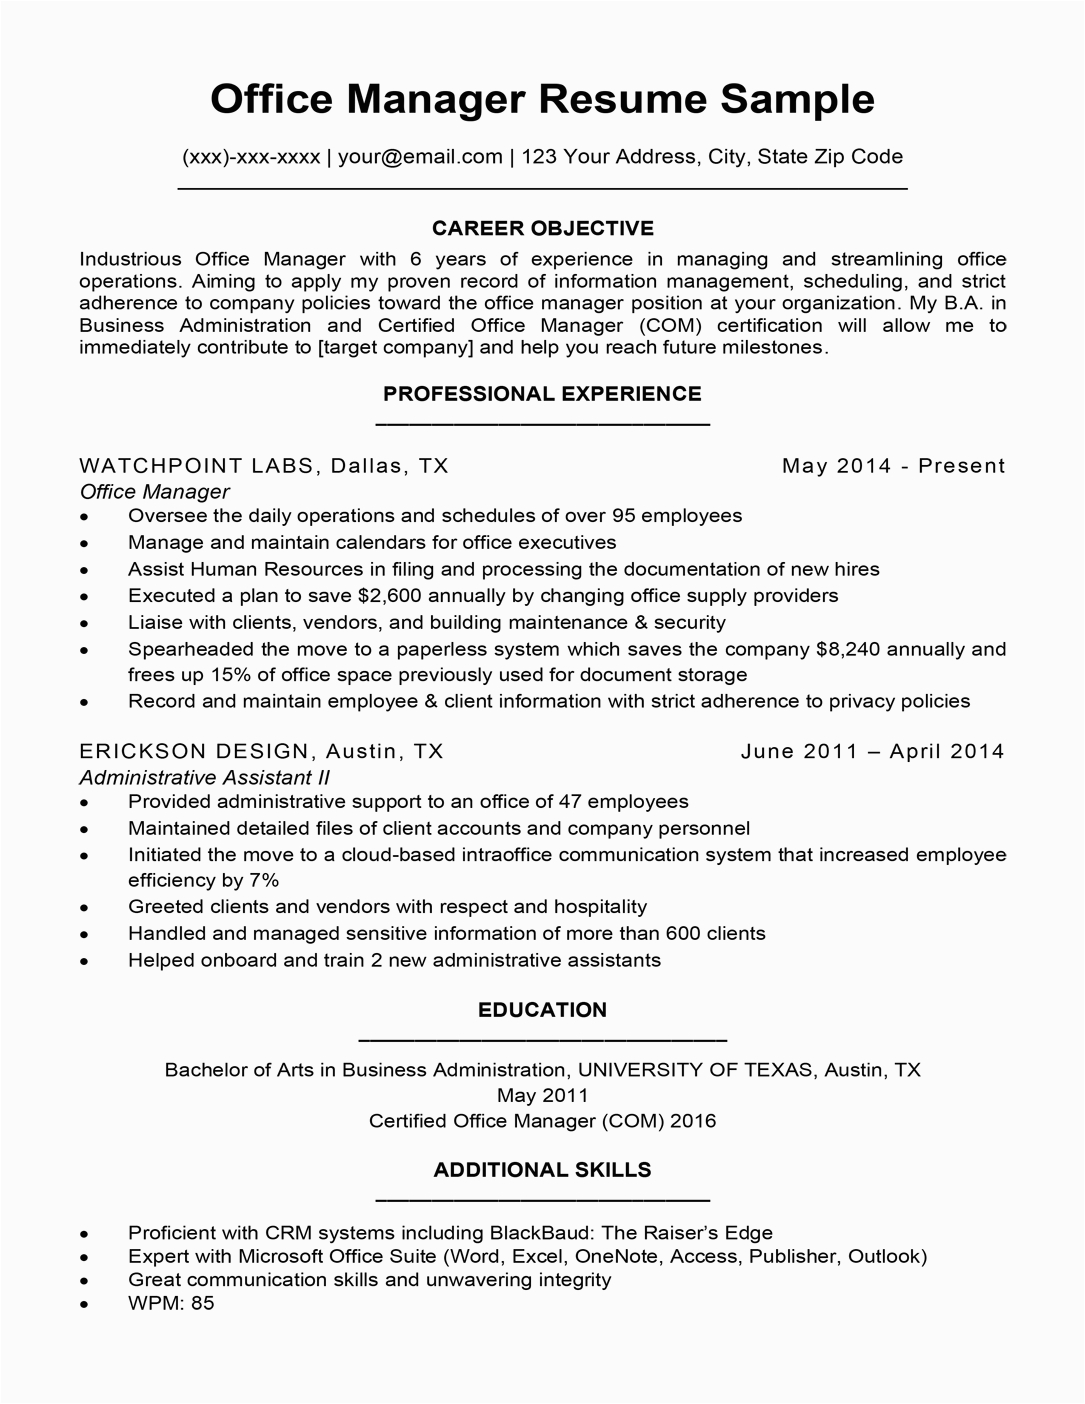 Resume Objective Sample for Office Staff Fice Manager Resume Sample